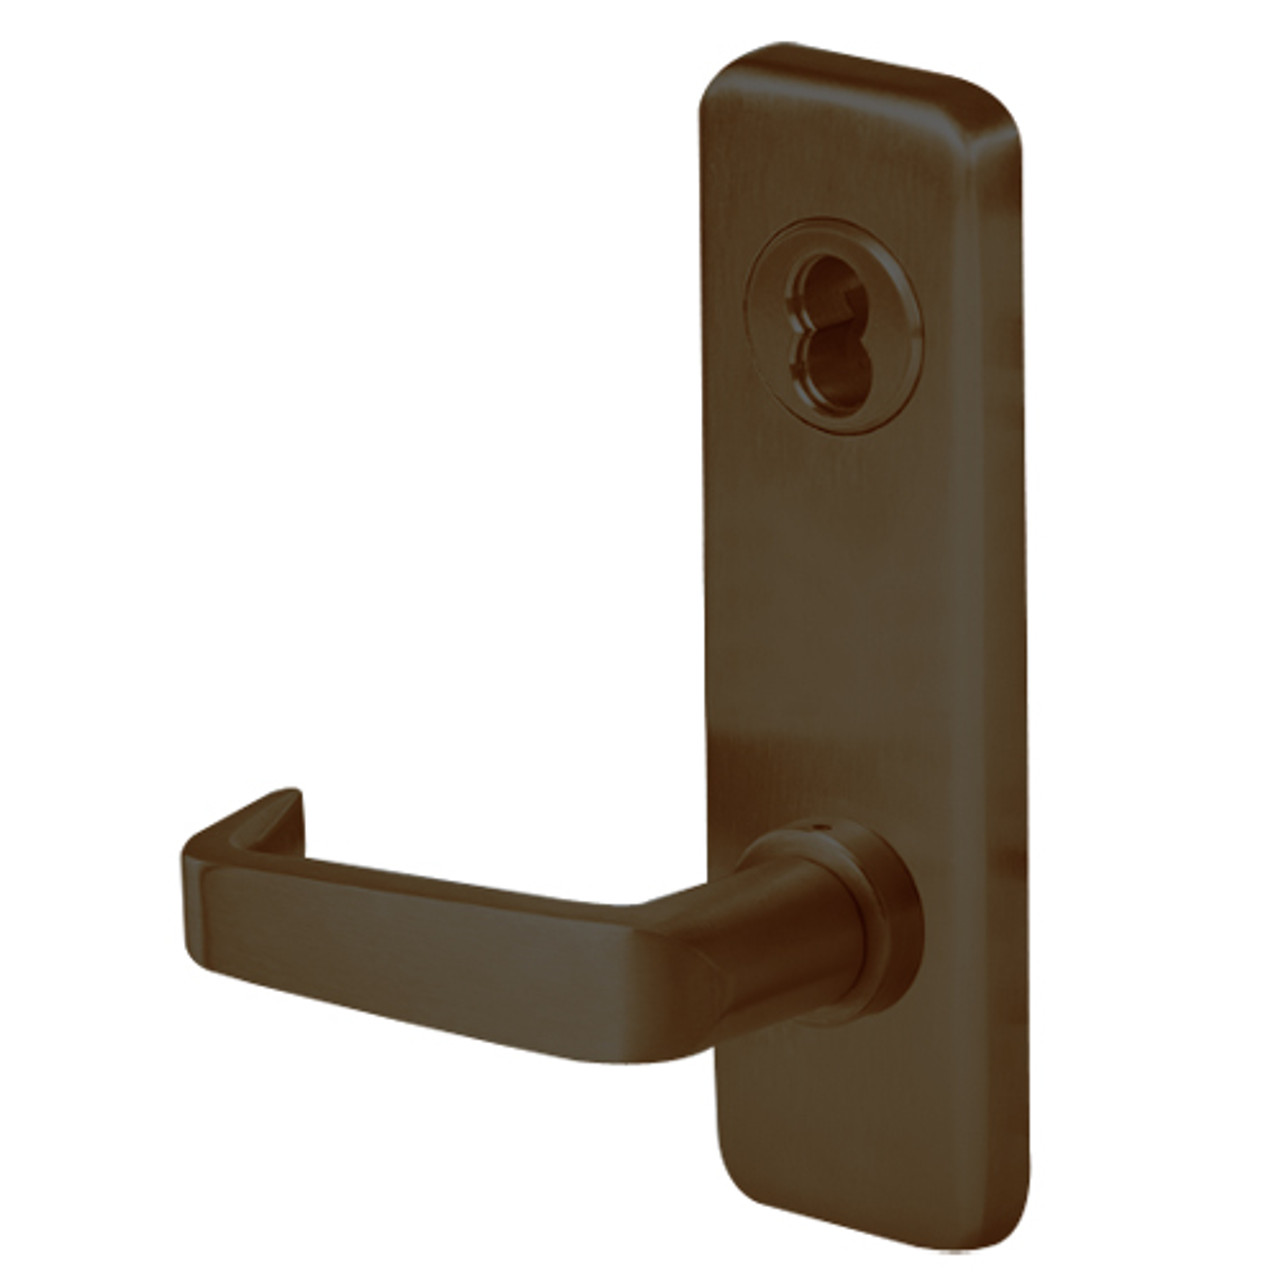 45H0LB15J613 Best 40H Series Privacy with Deadbolt Heavy Duty Mortise Lever Lock with Contour with Angle Return Style in Oil Rubbed Bronze